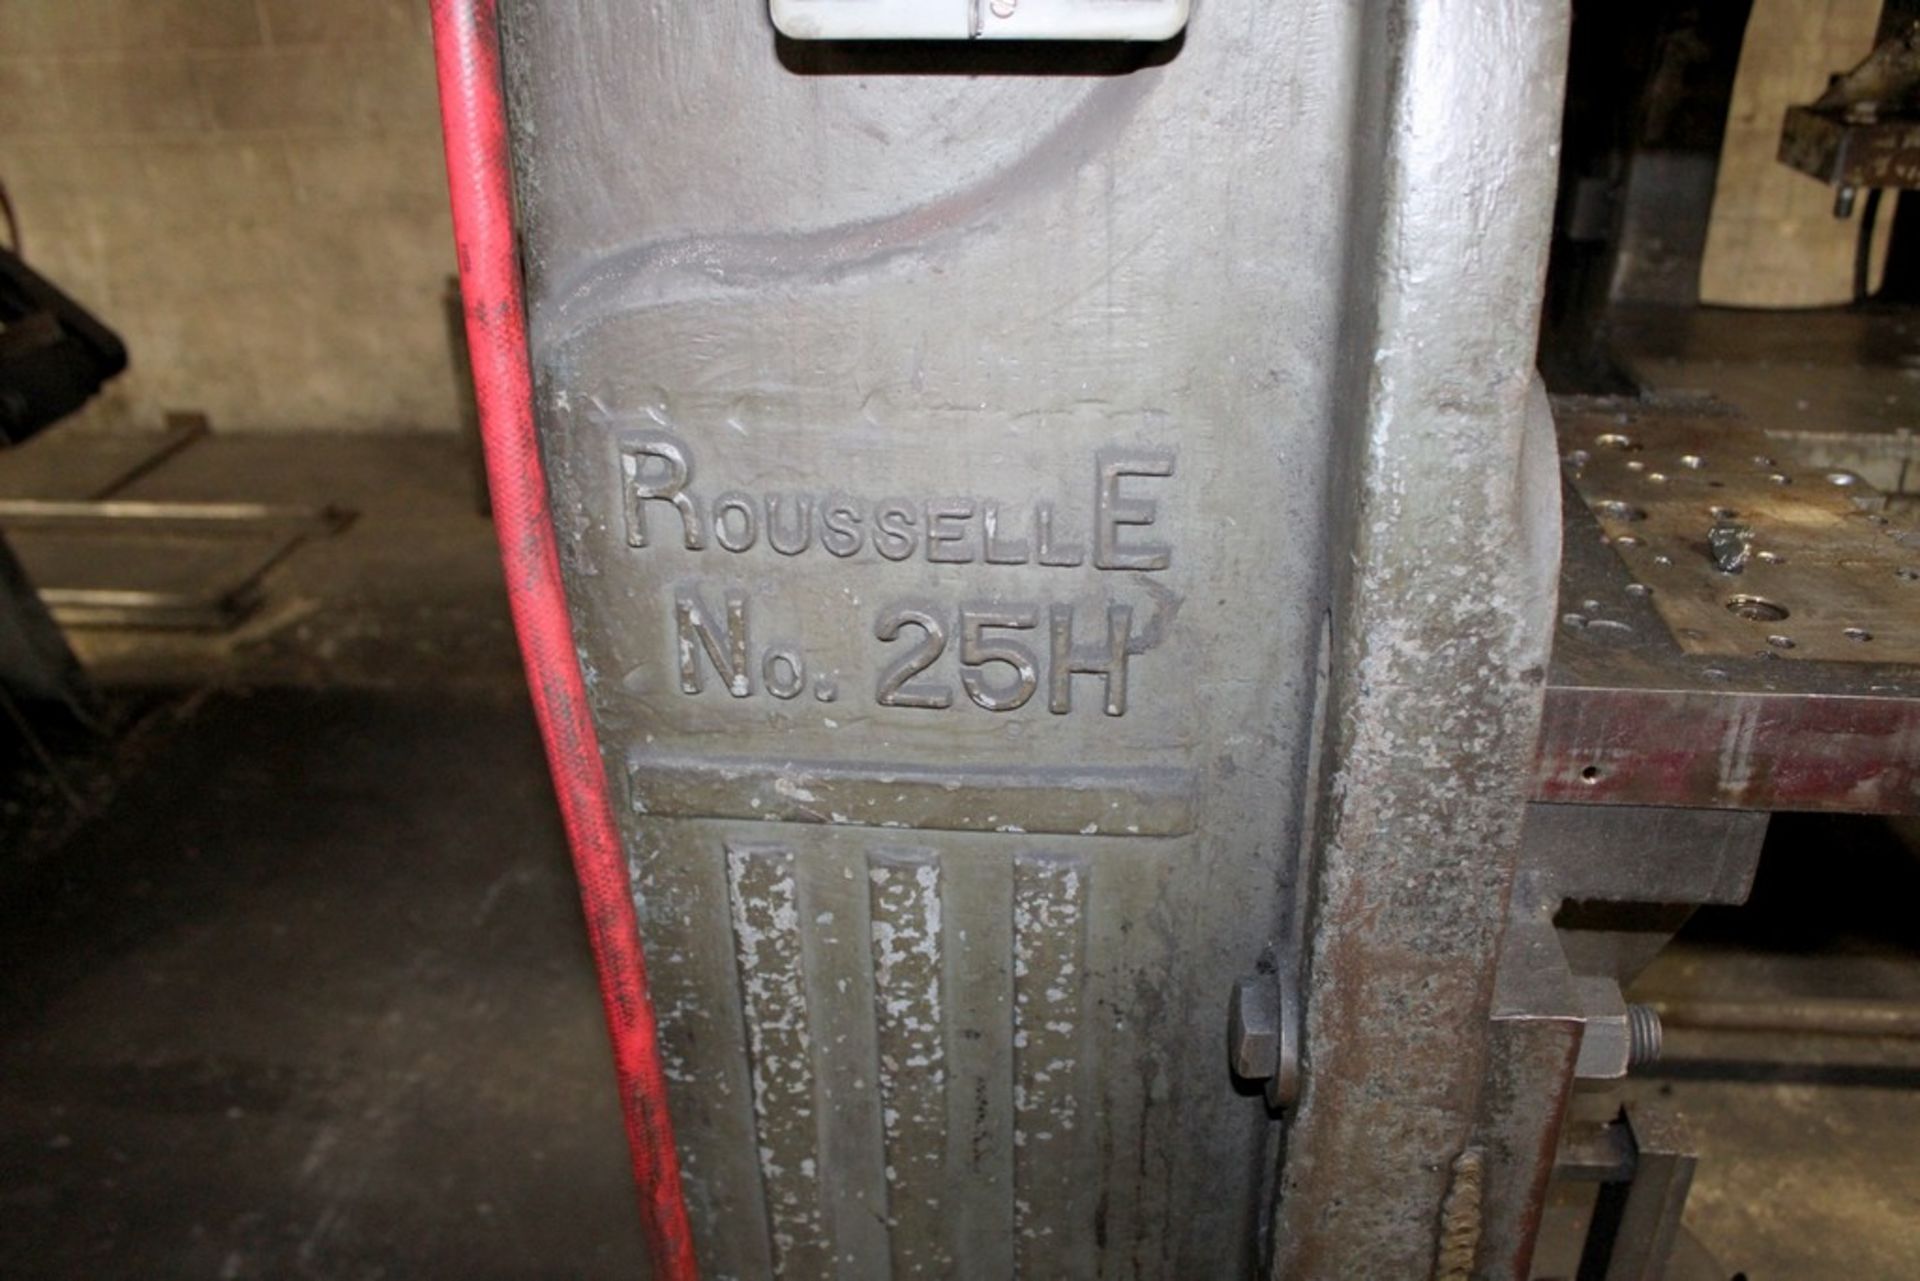 Rousselle No 25H Adjustable Bed (Horn) Punch Press, 25 Ton - 2 1/2" Stroke - 8" x 14 1/2" Adjustable - Image 3 of 5